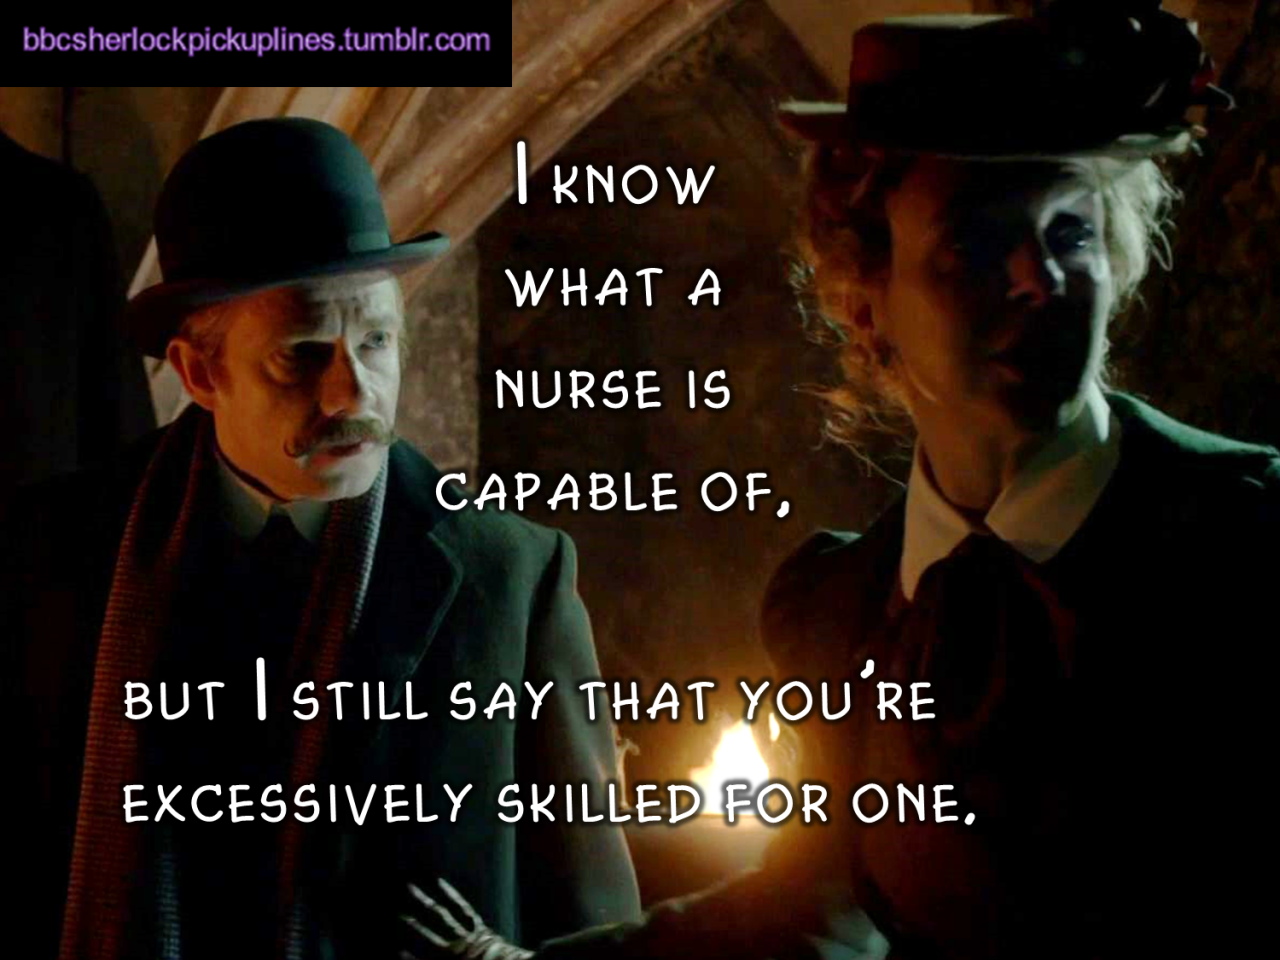 â€œI know what a nurse is capable of, but I still say that youâ€™re excessively